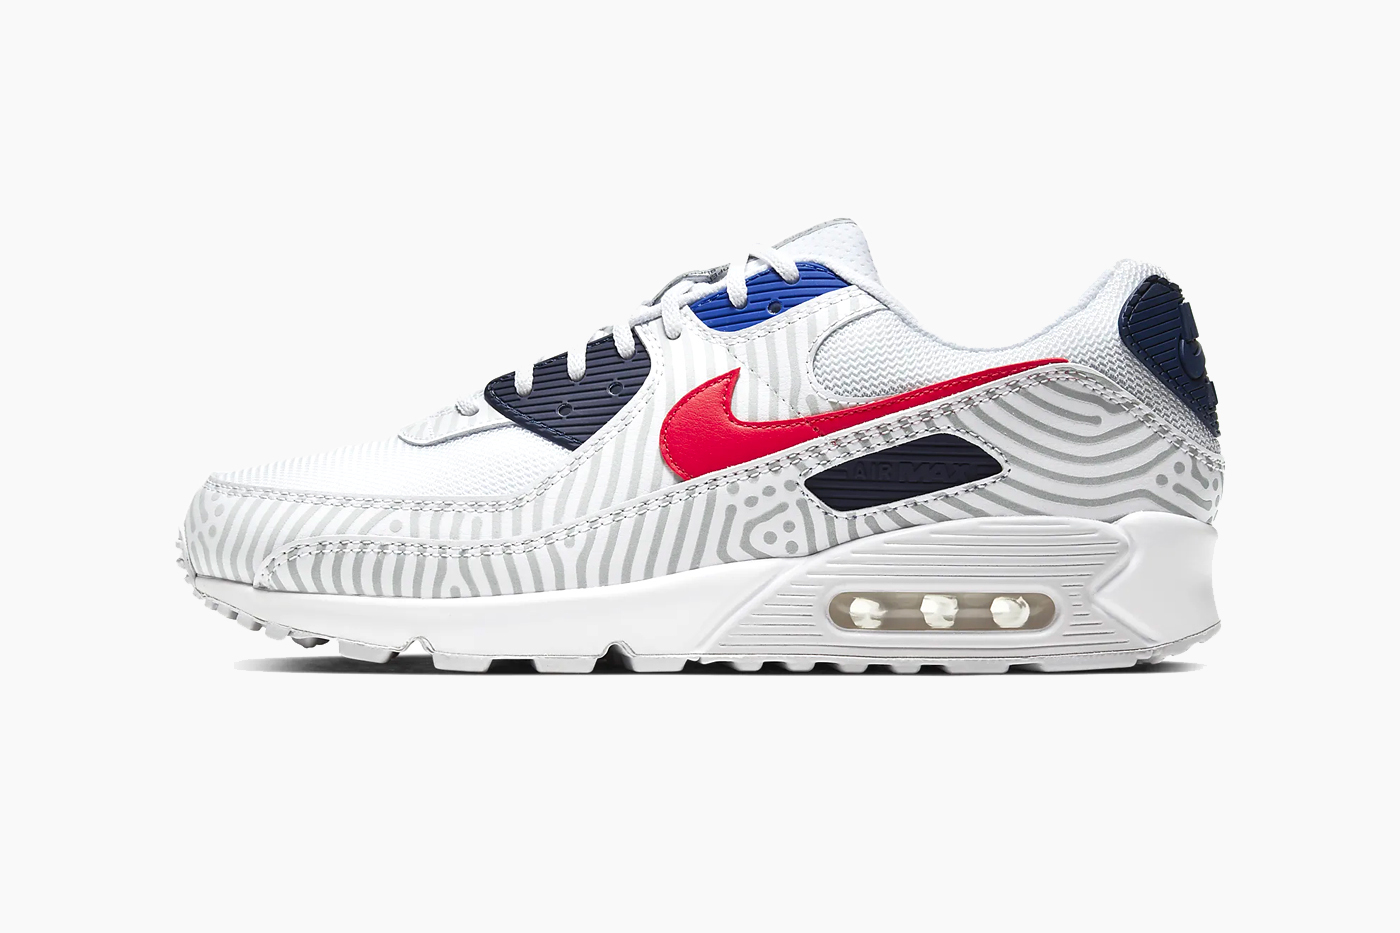 Solicitud hermosa Constituir Nike Air Max 90 "White/University Red" | Hypebeast